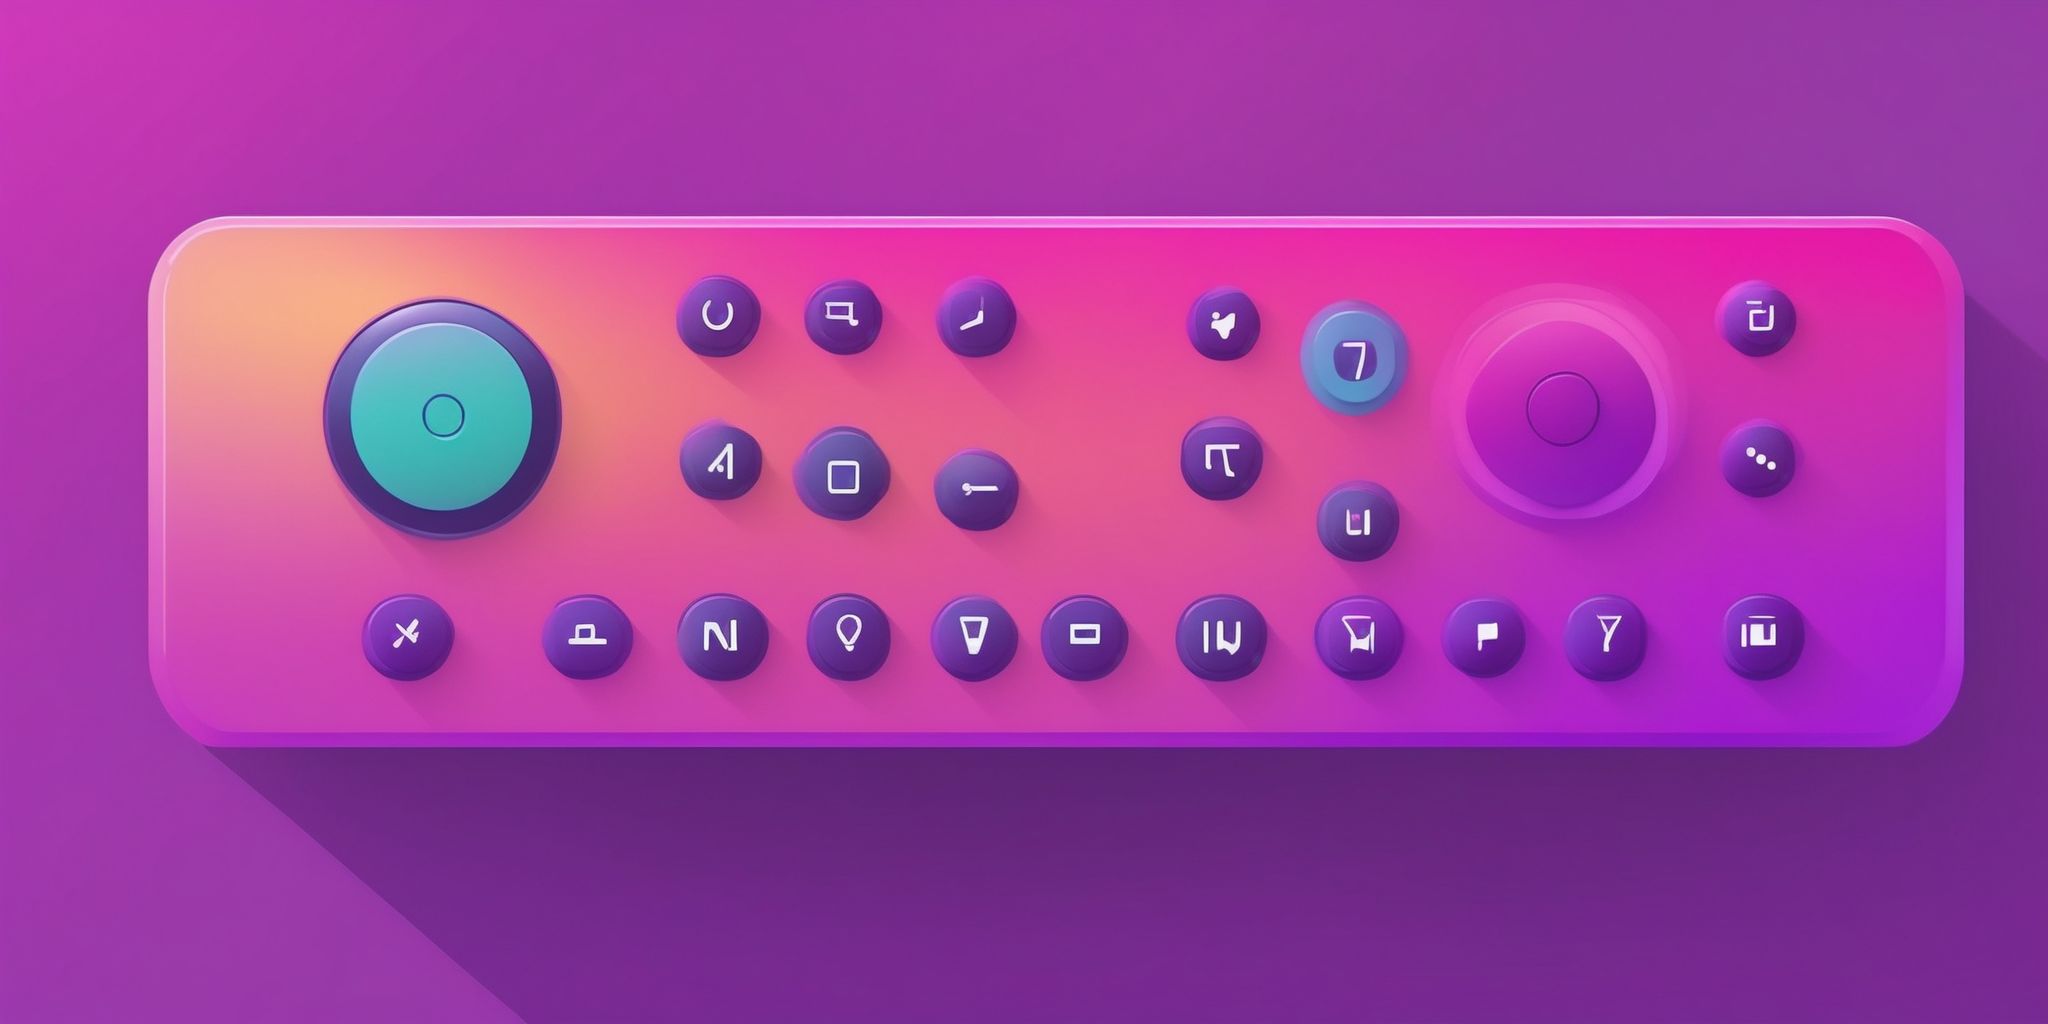 TV remote in flat illustration style, colorful purple gradient colors